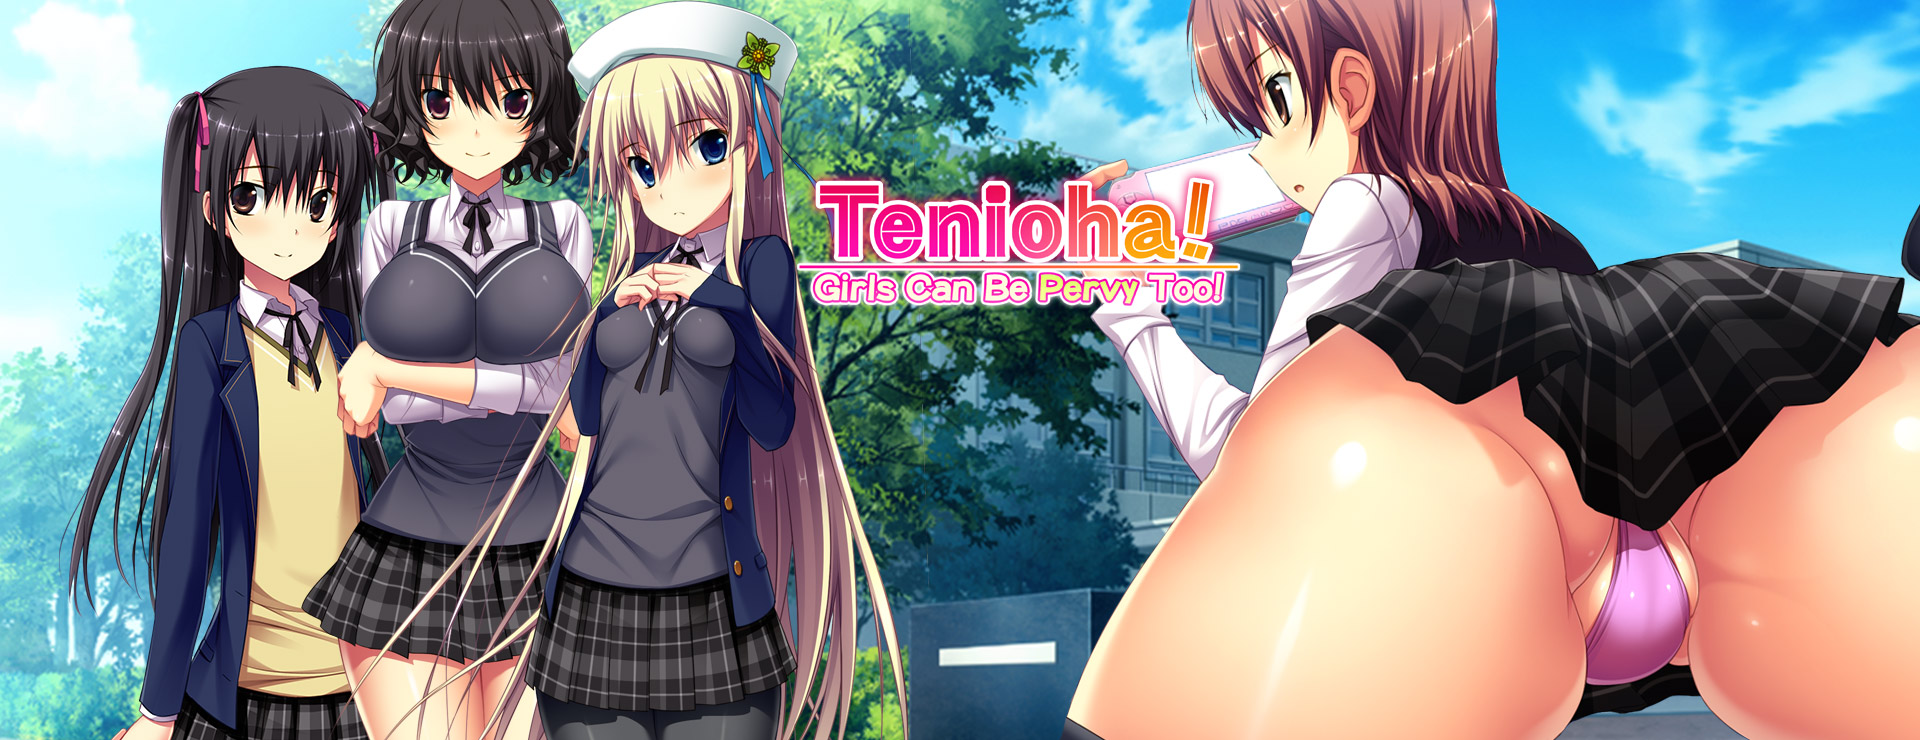 Tenioha! : Girls Can Be Pervy Too! - 虚拟小说 遊戲